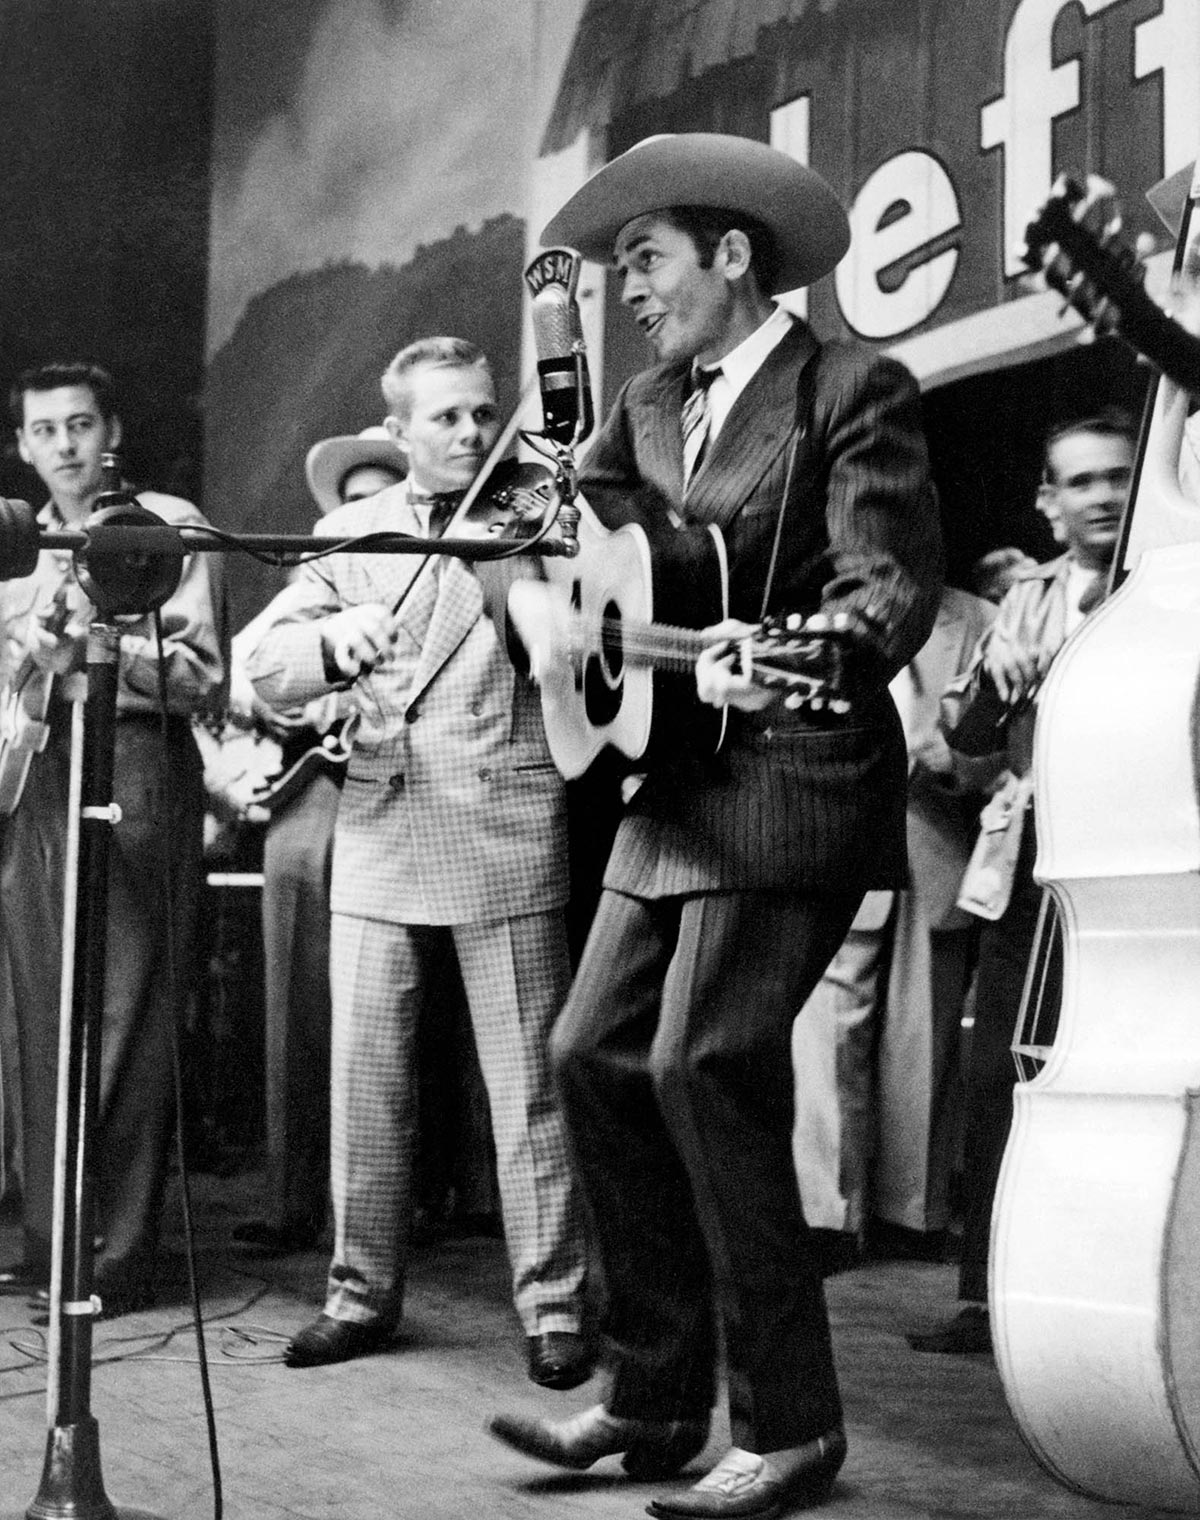 Hank Williams performing on the Grand Ole Opry wearing the suit that is now on display